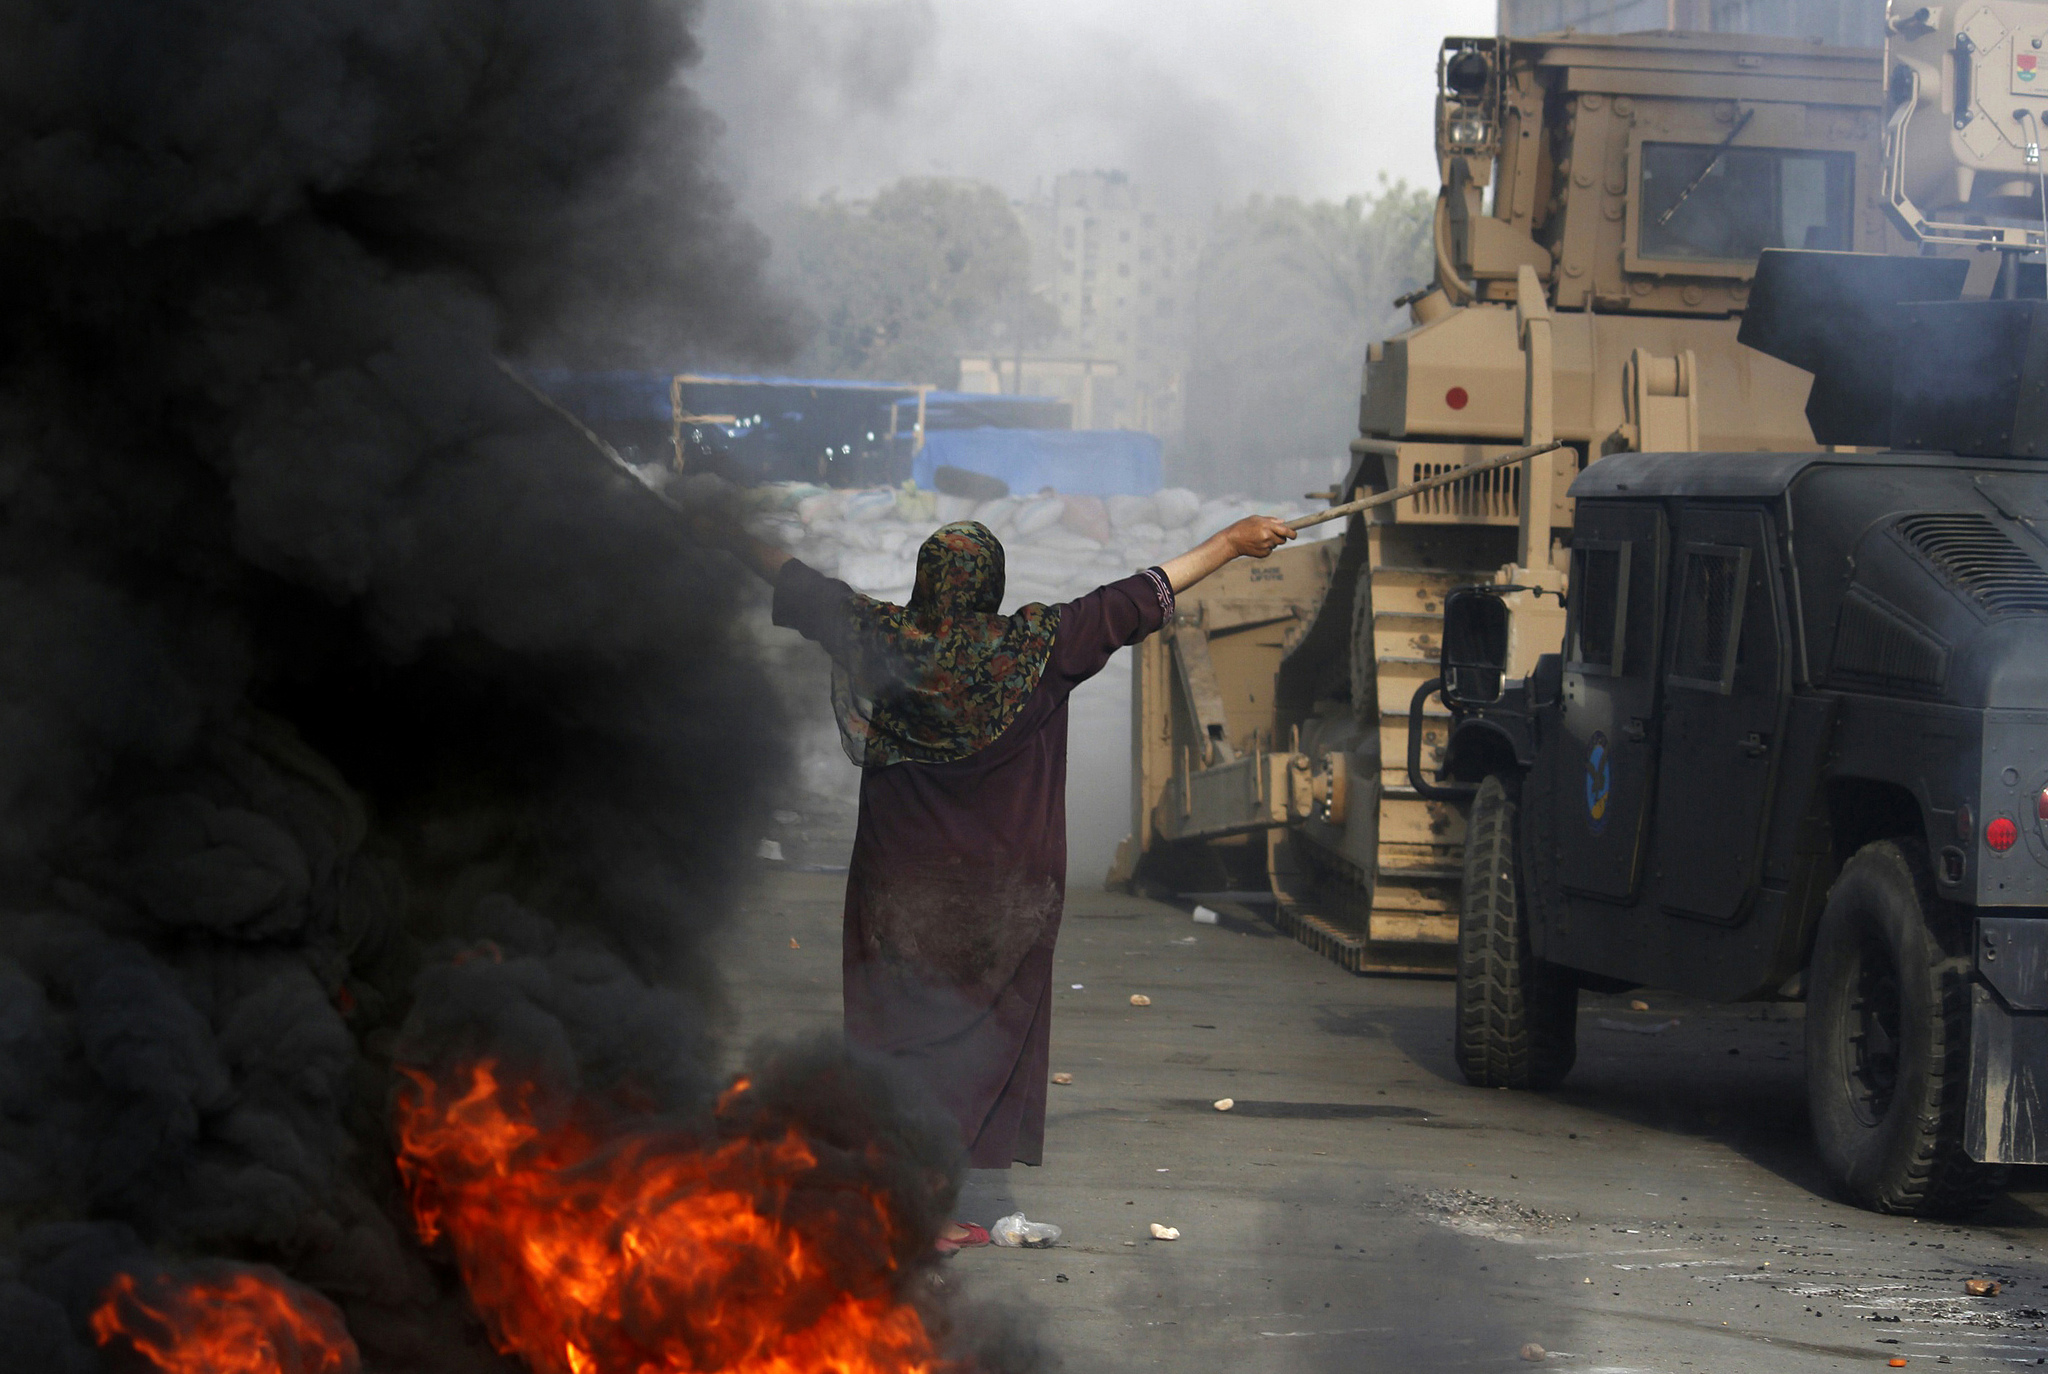 The U.S. Is Still Funding Oppression in Egypt